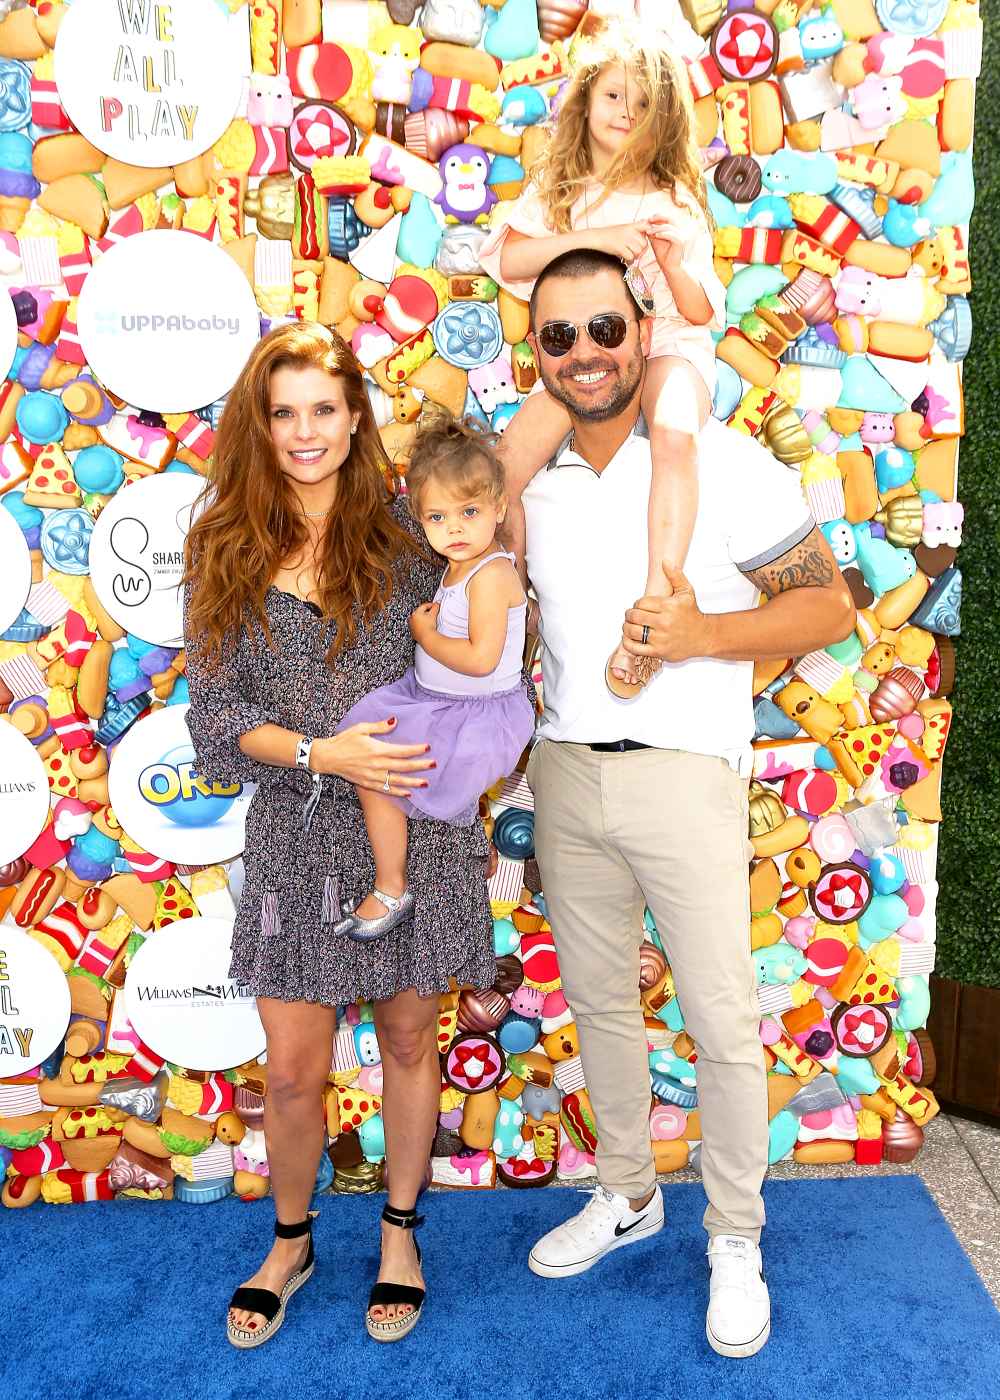 JoAnna Garcia and Nick Swisher with daughter Emerson and Sailor attend the Zimmer Children's Museum's 3rd Annual We All Play Fundraiser held on April 28, 2018 in Santa Monica, California.